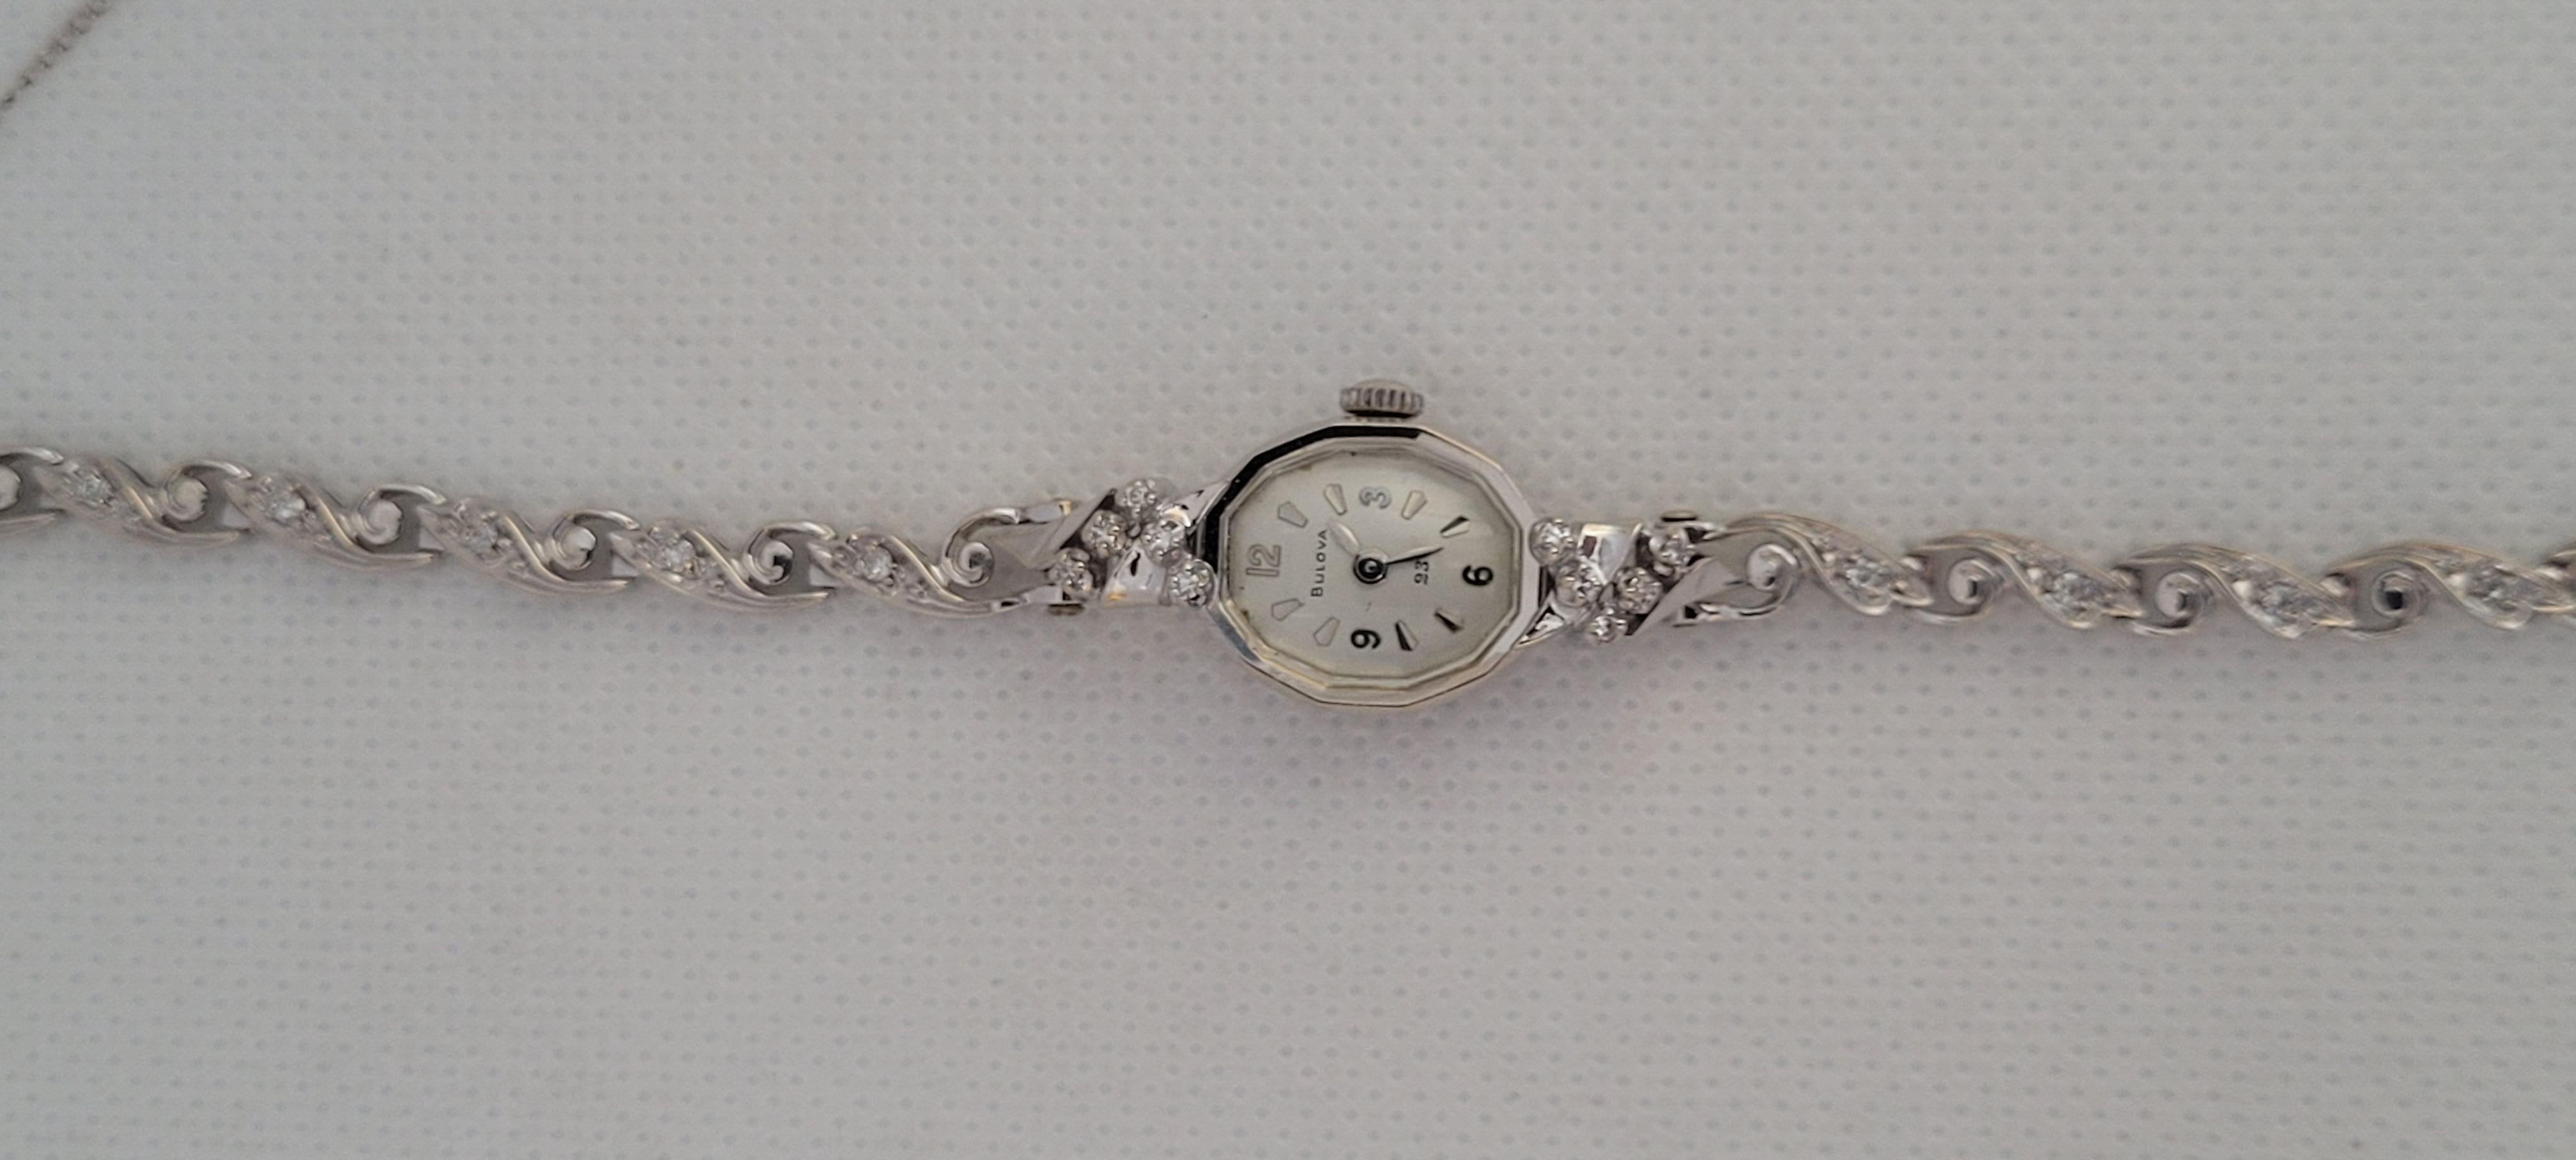 14kt White Gold Bulova Diamond Watch Ladies Serviced Working Warranty 7 Inches For sale is a stunning ladies' Bulova diamond watch crafted in 14kt white gold. This art deco vintage timepiece has been fully serviced and is in good working condition,